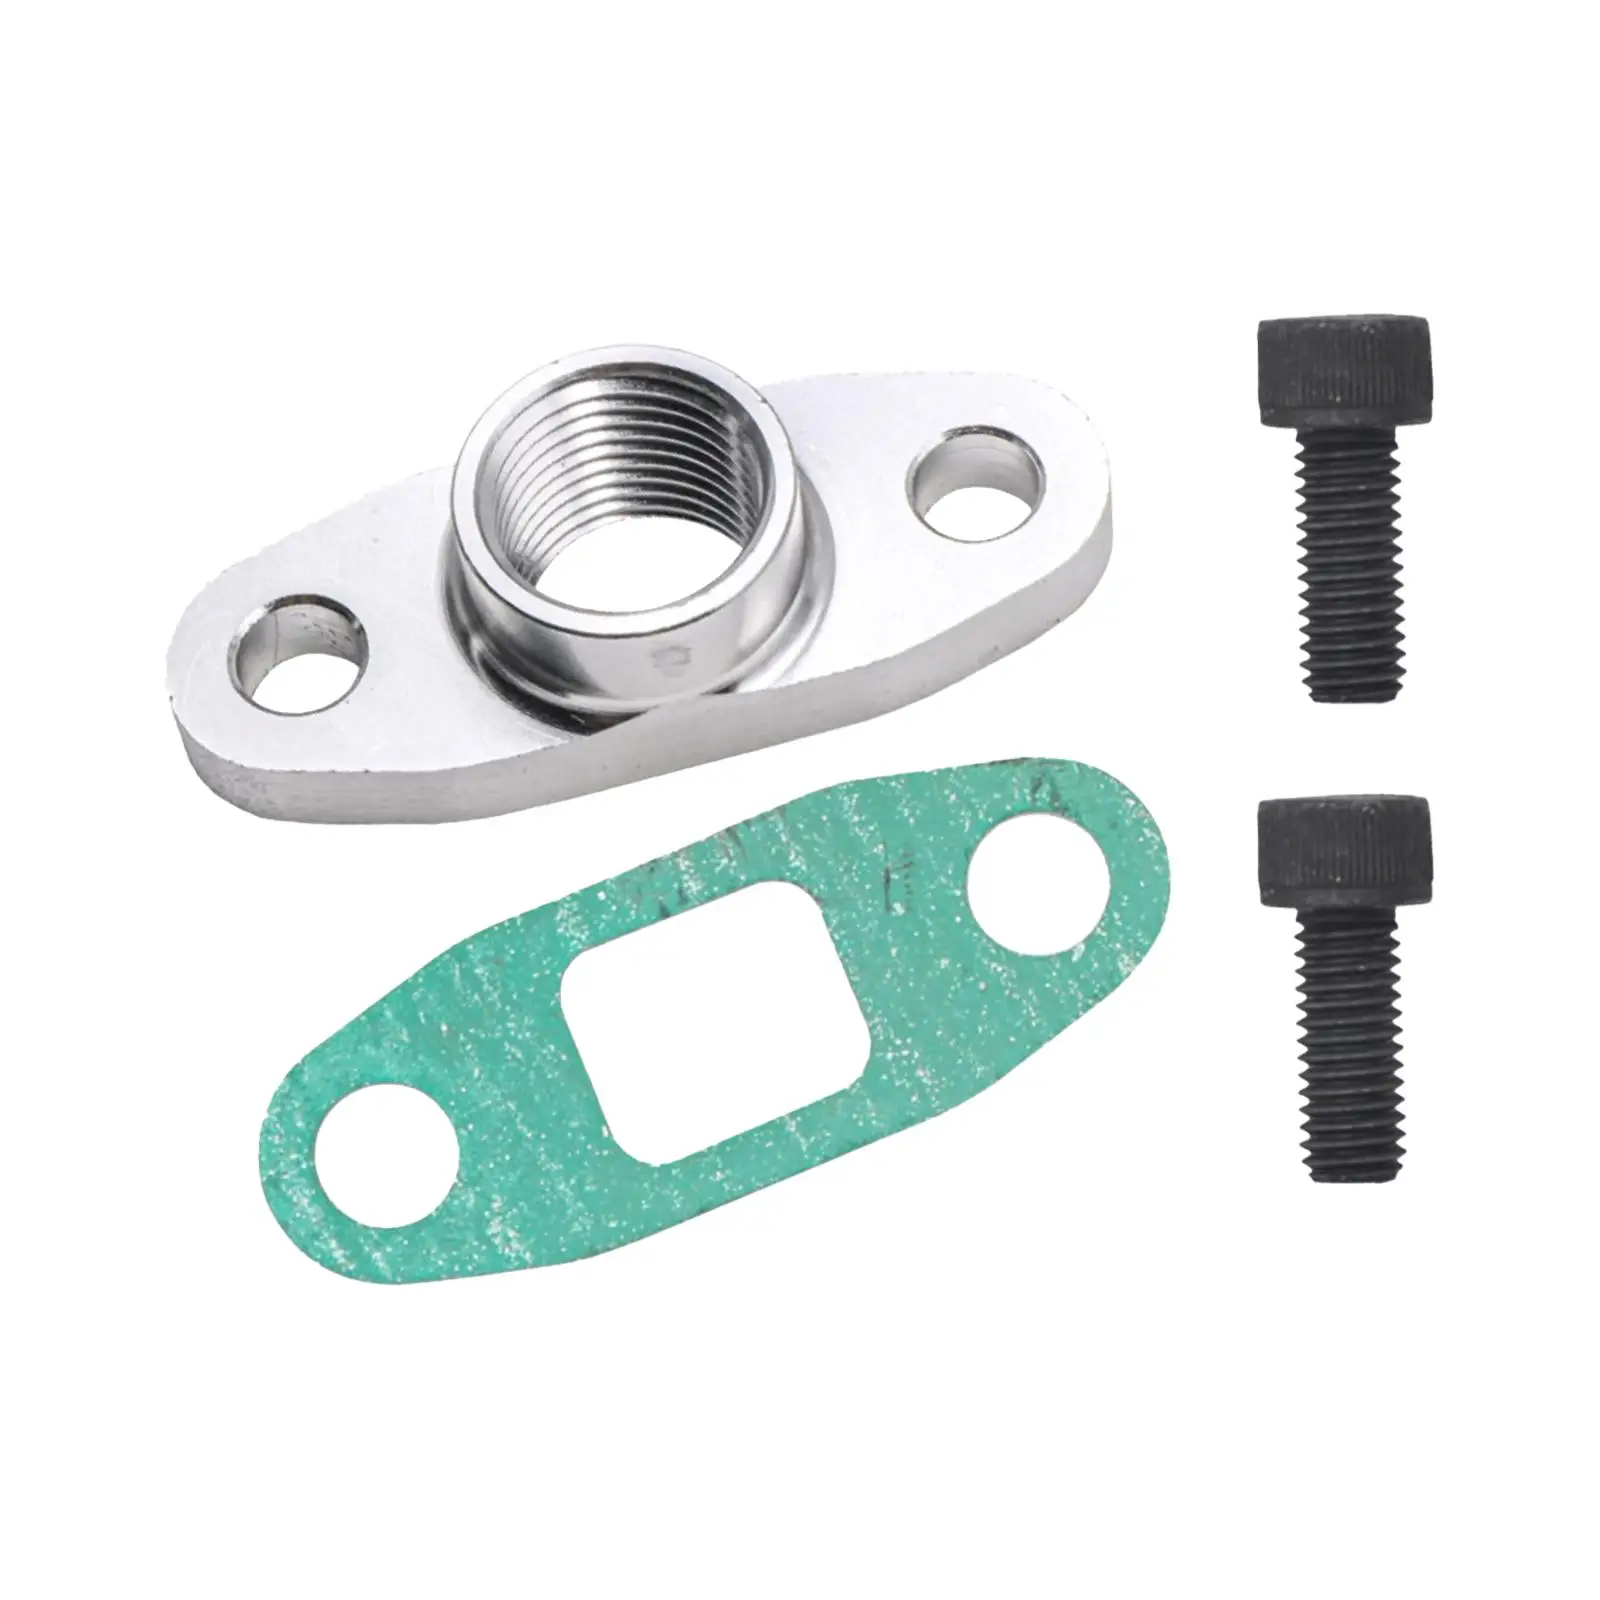 Oil Drain Outlet Flange Gasket Adapter Set with Gasket Accessory Aluminum Alloy 1/2